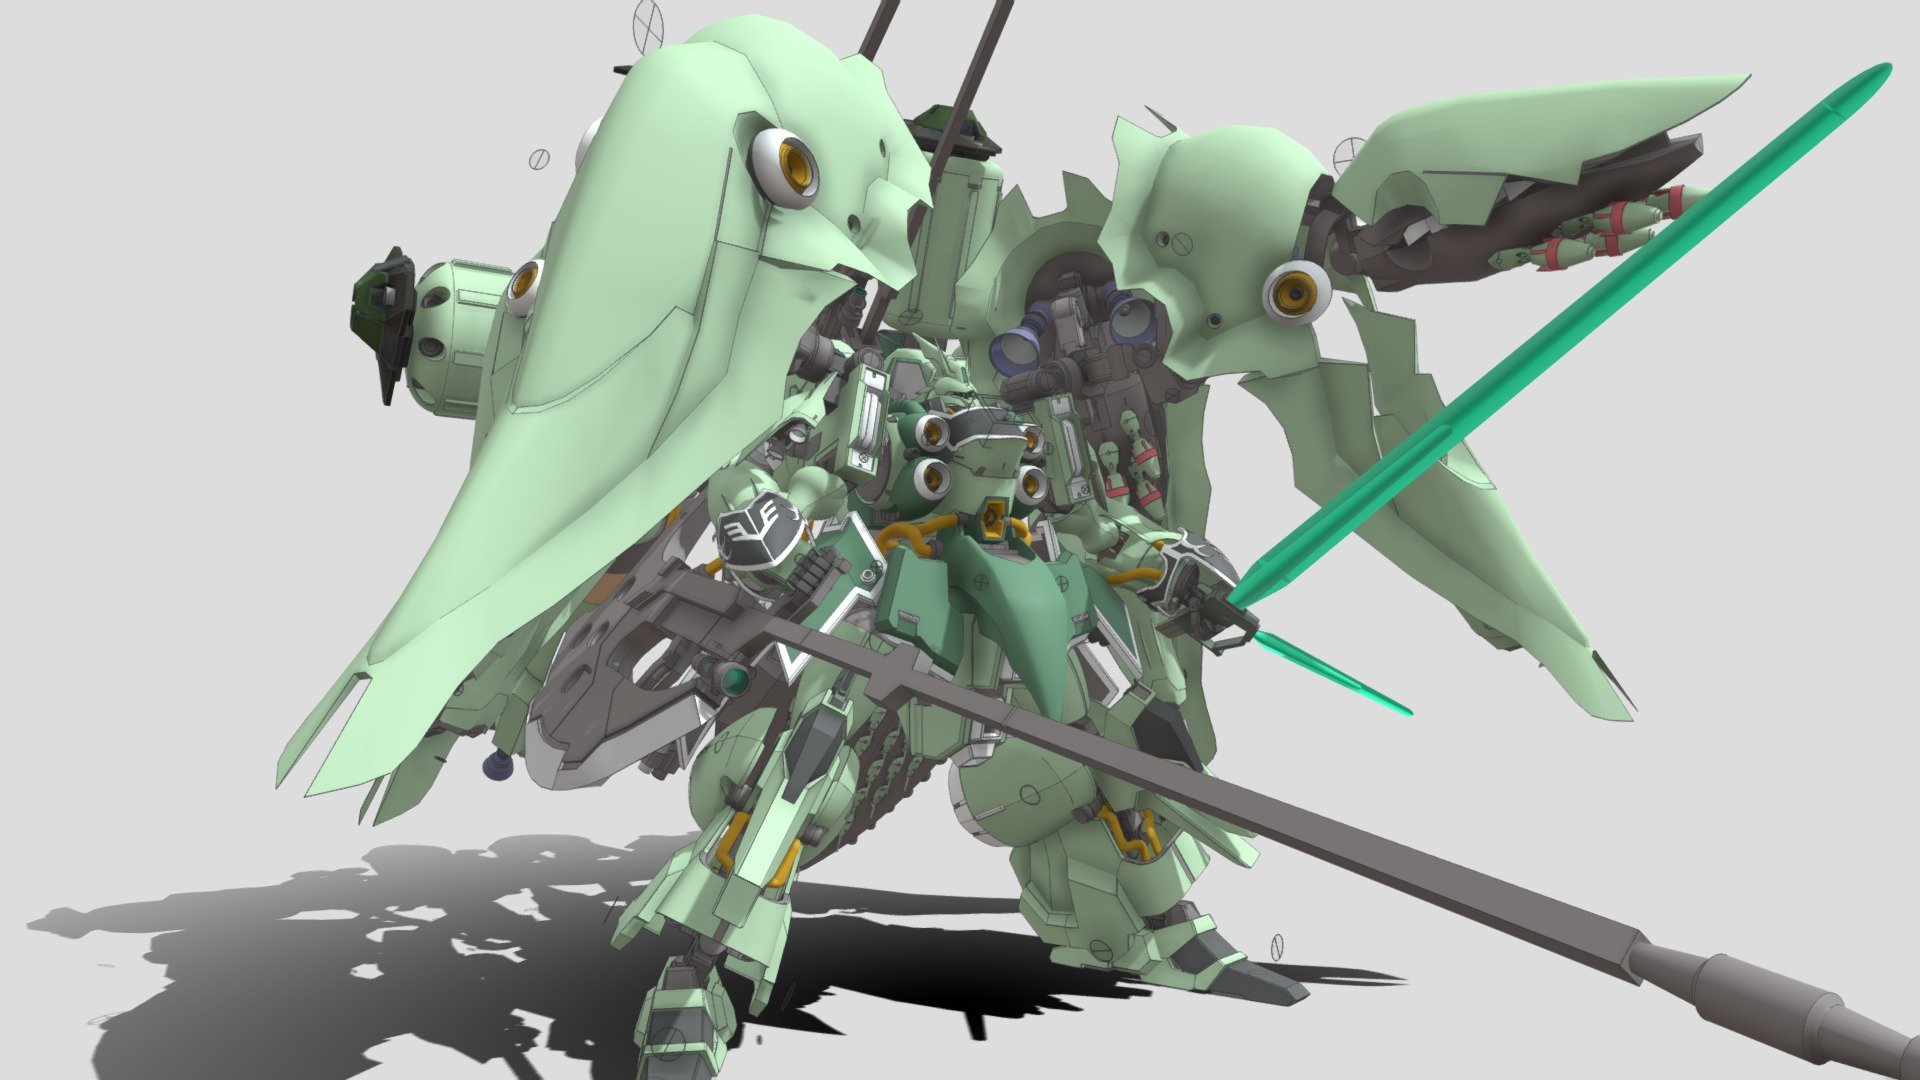 The Kshatriya rebuilt using the salvaged remains of the MSN-04 Sazabi and armed with the equipment/weaponry from current and past Neo Zeon movements.

Art &amp; Design © GunZcon - NZ-666 Kshatriya Verbessurung - 3D model by GunZcon 3d model